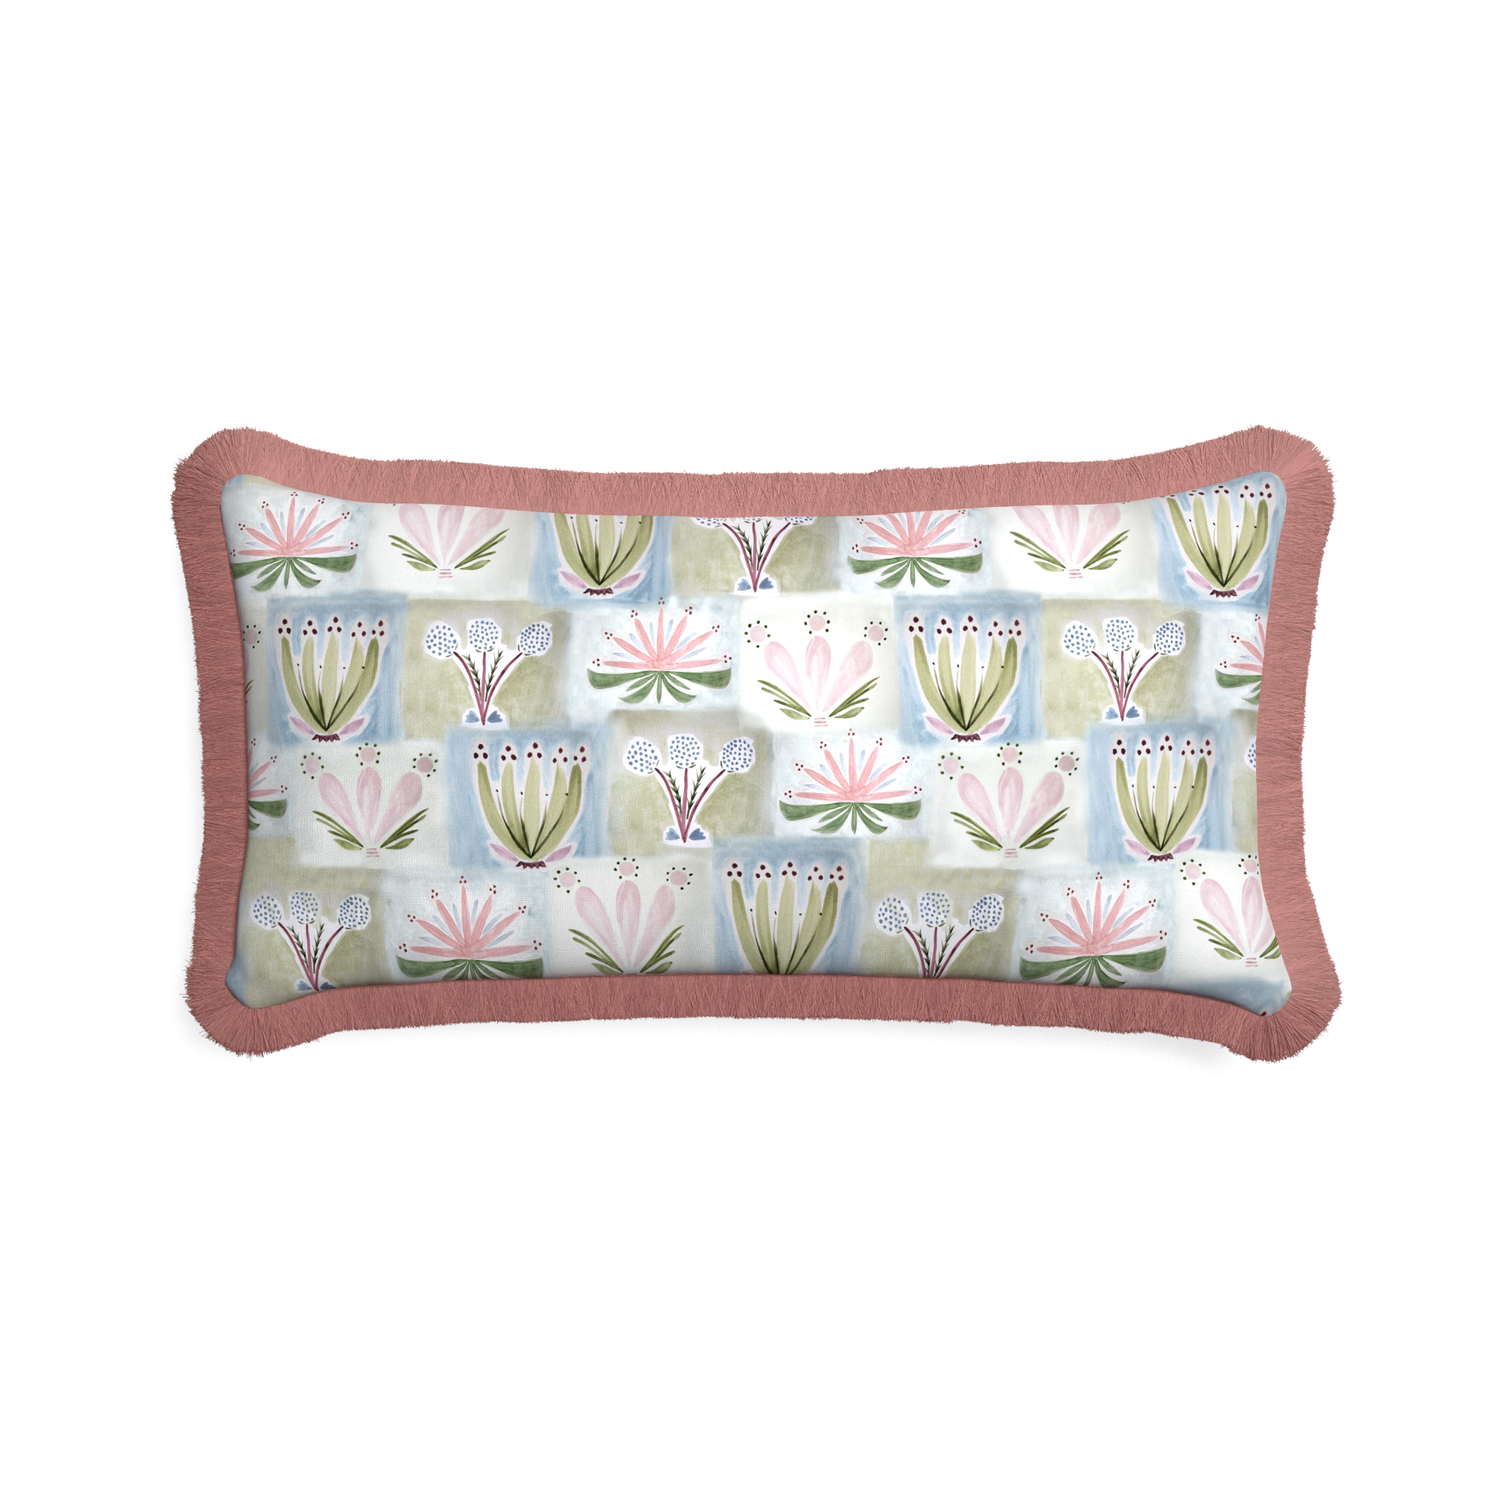 Midi-lumbar harper custom hand-painted floralpillow with d fringe on white background